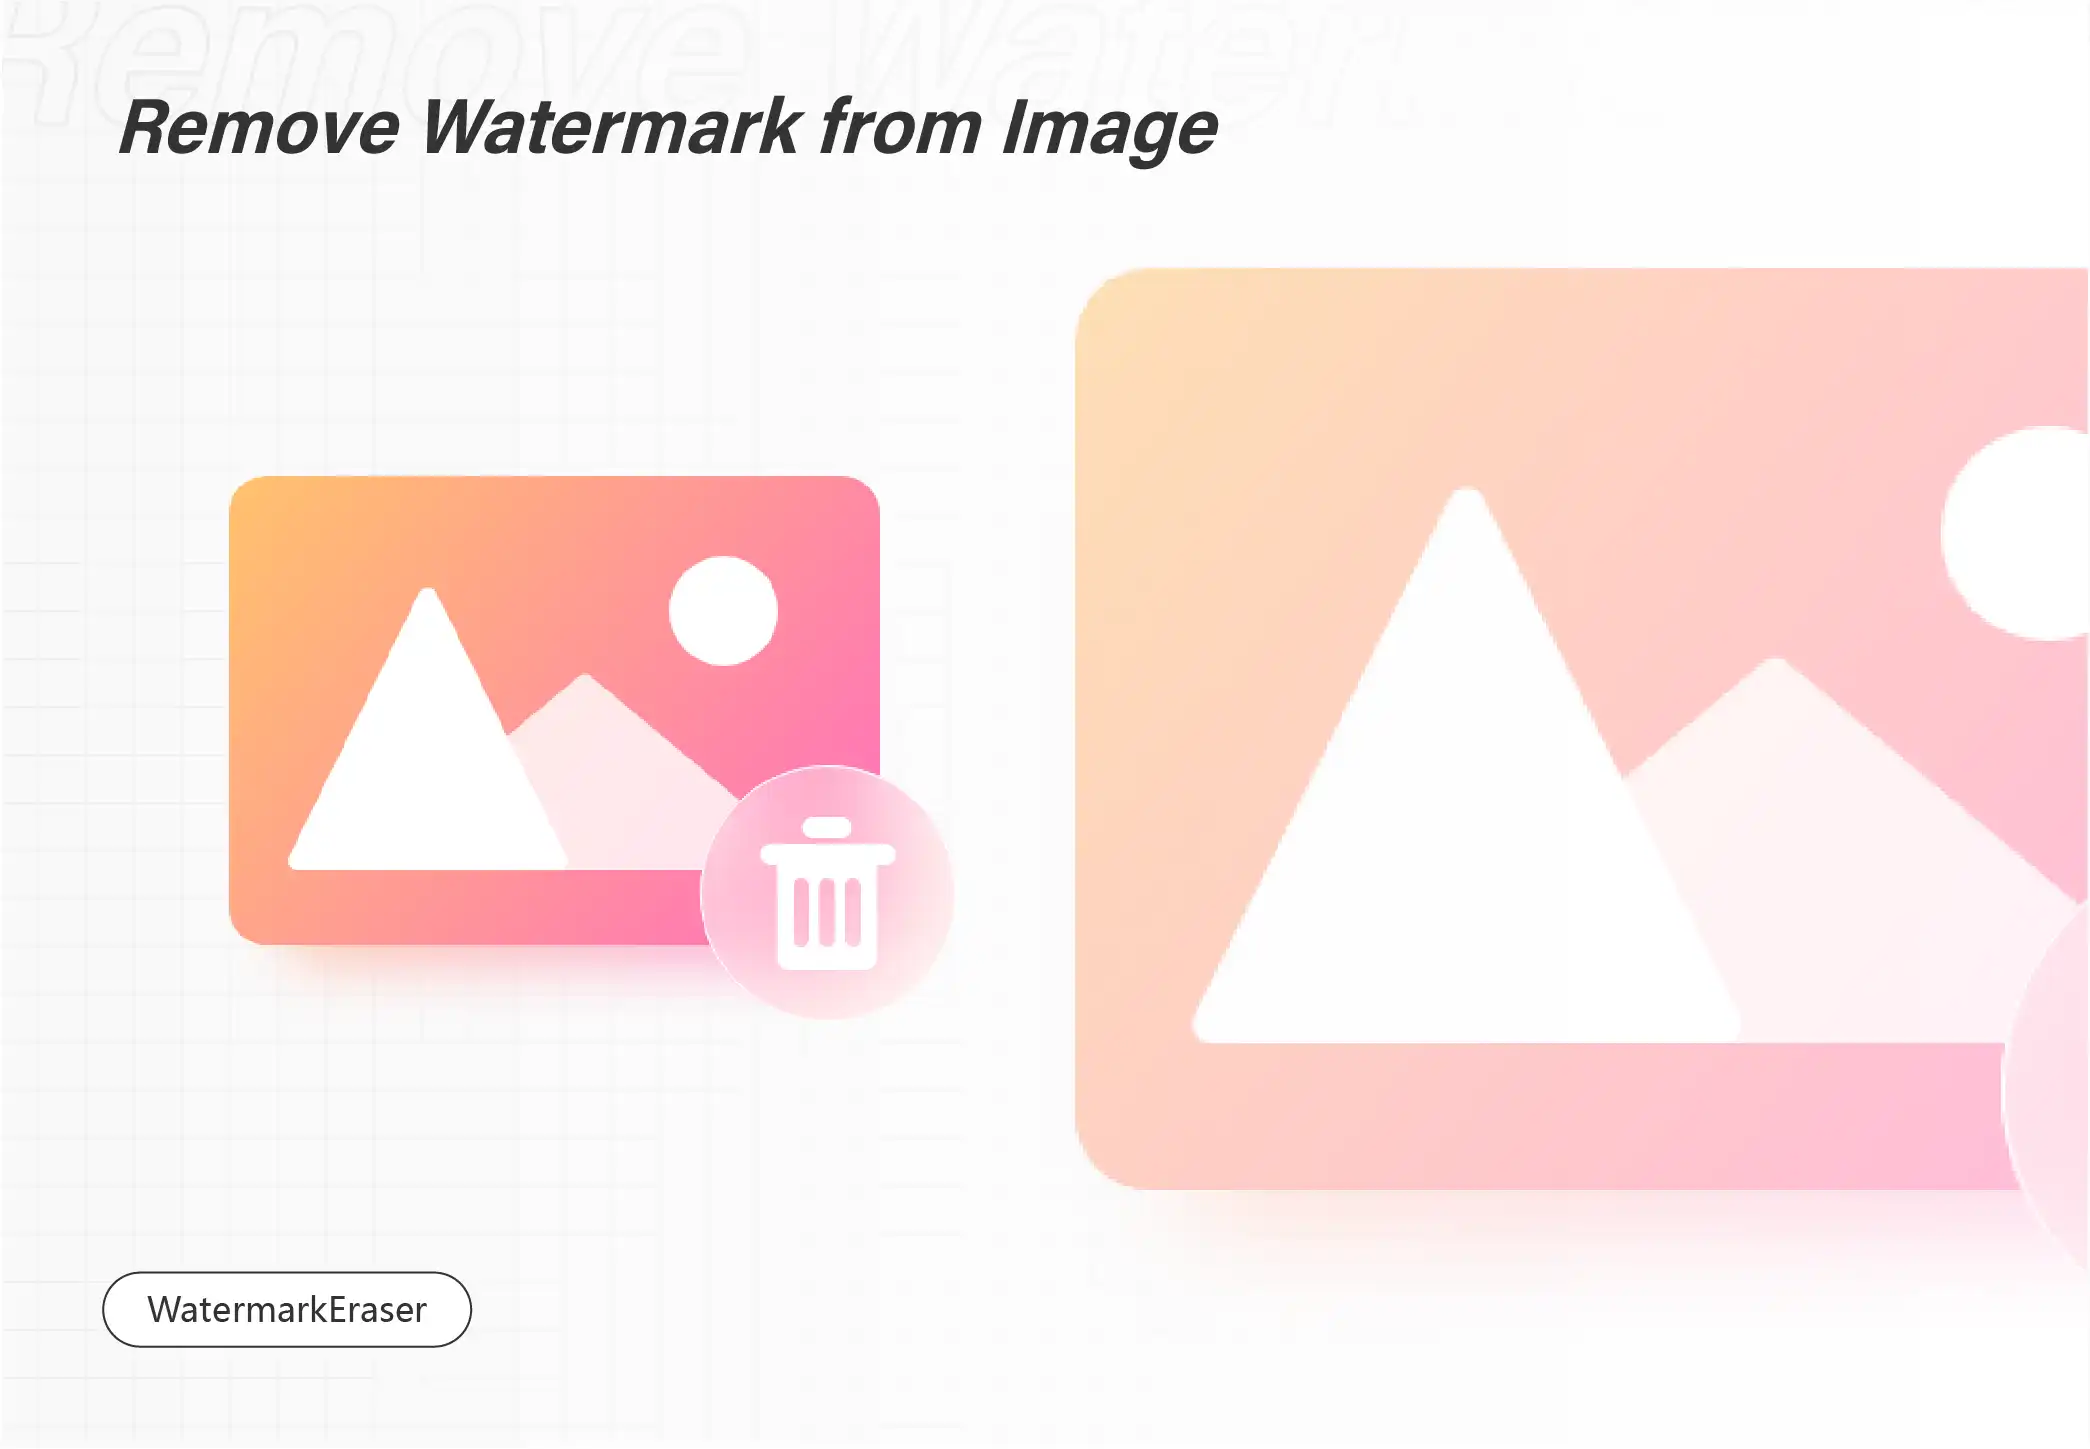 4 Best Watermark Remover Software for Image in 2022